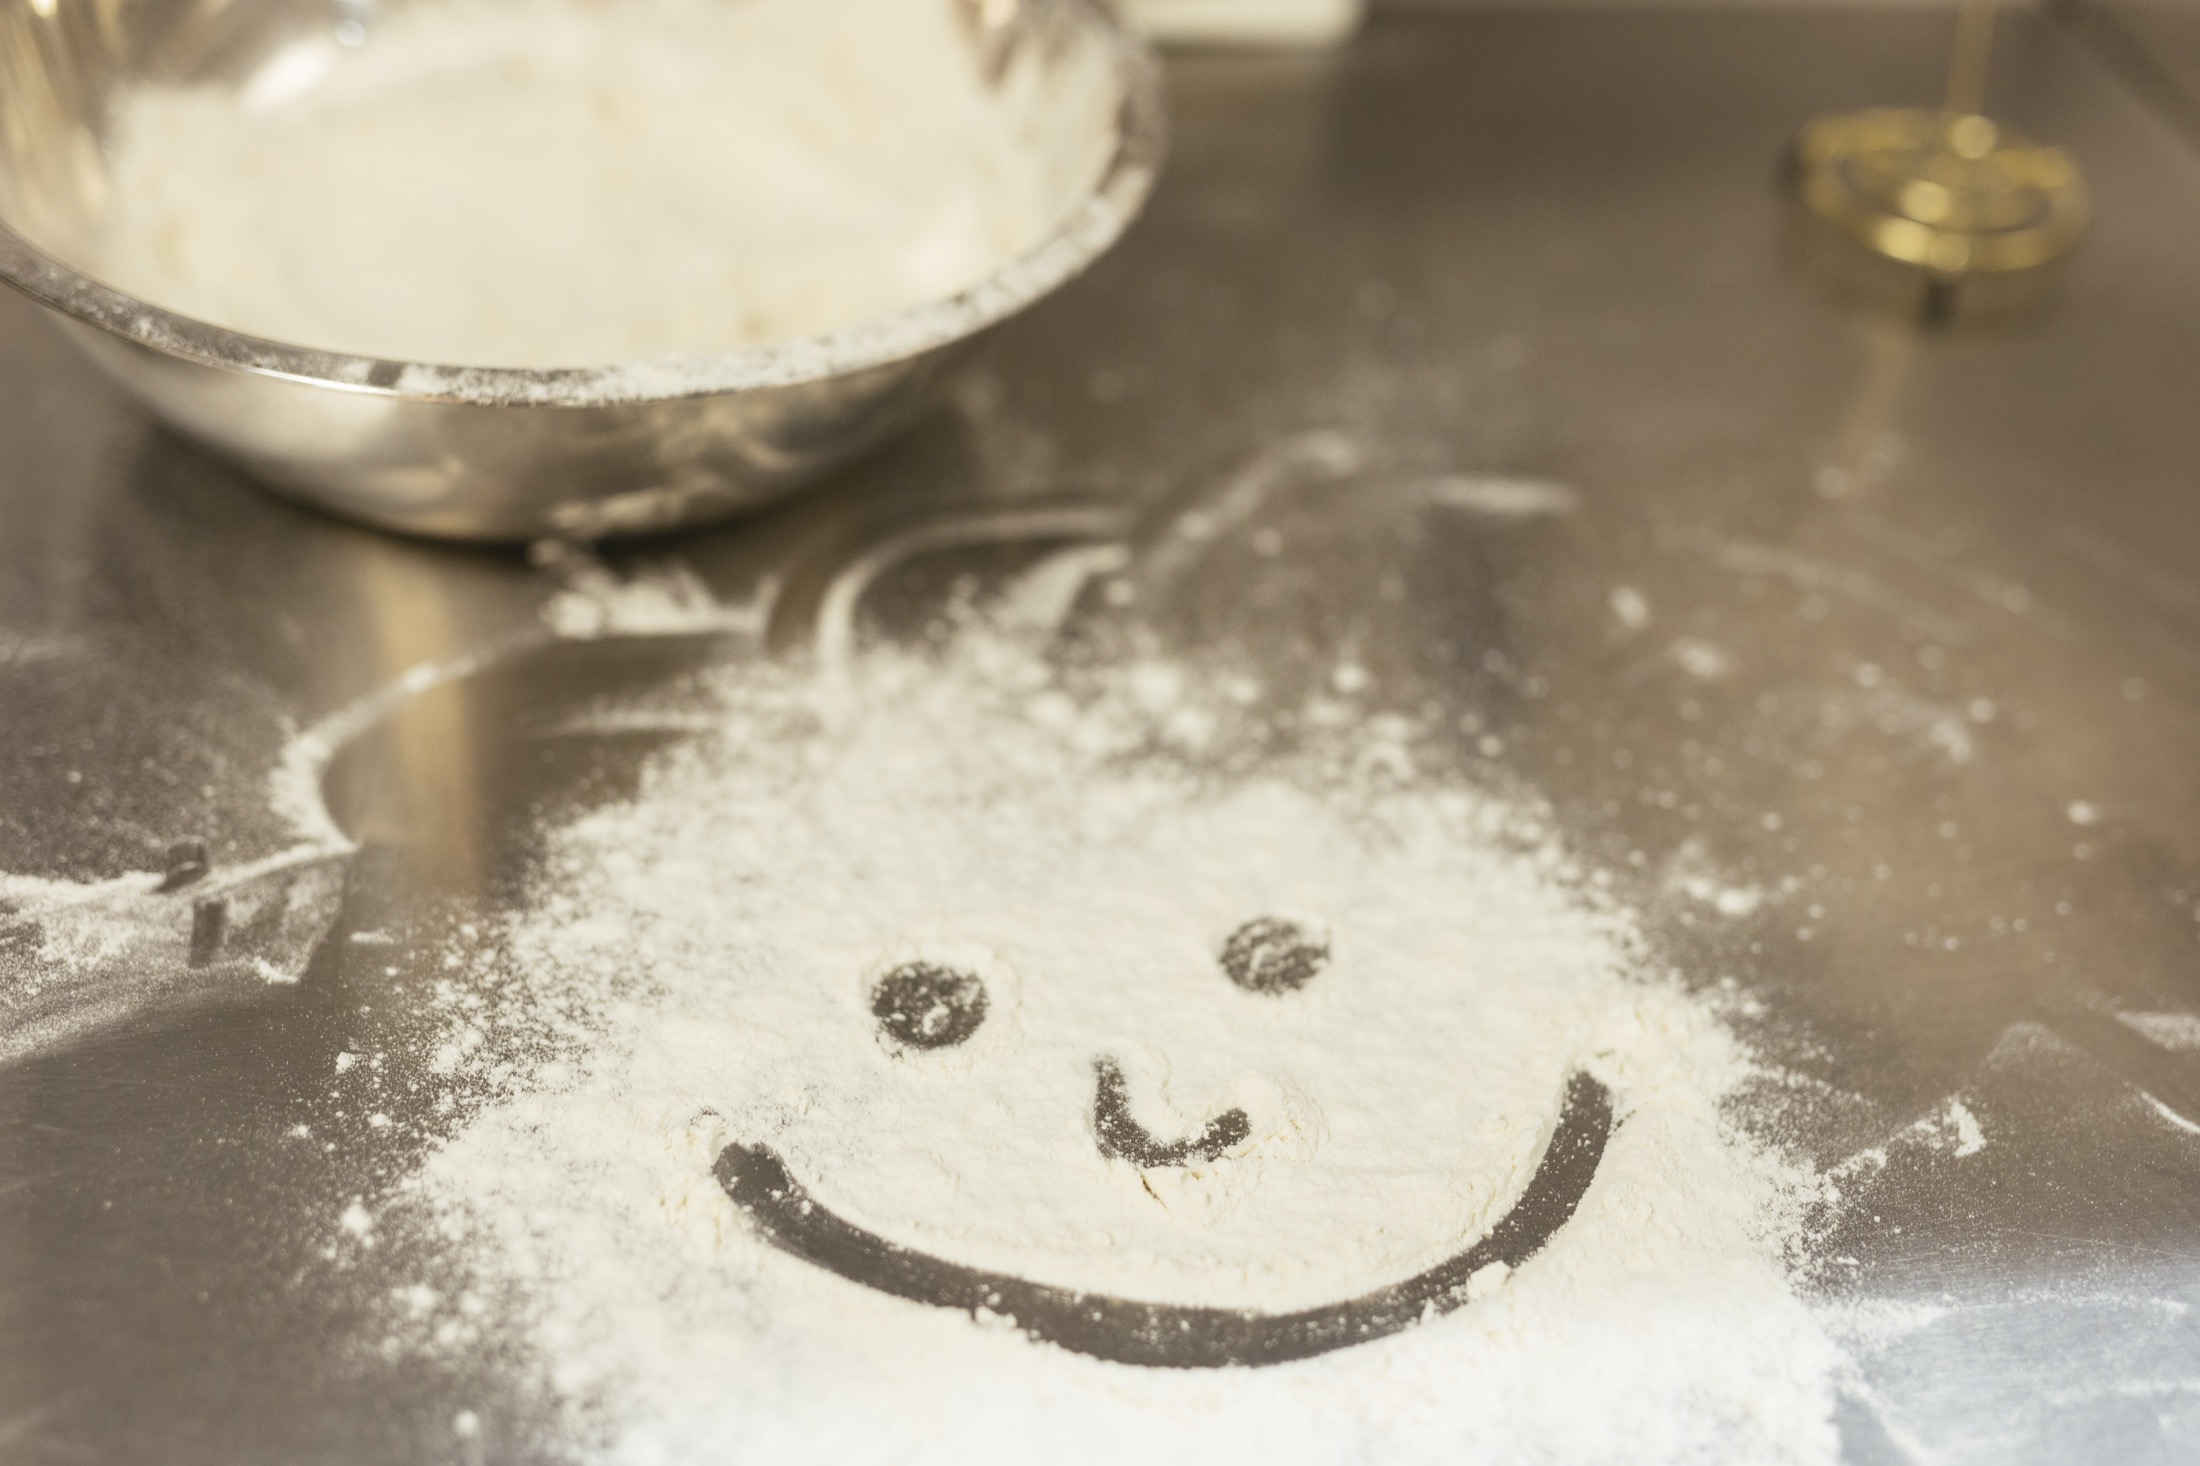 A smiley face drawn in cooking flour